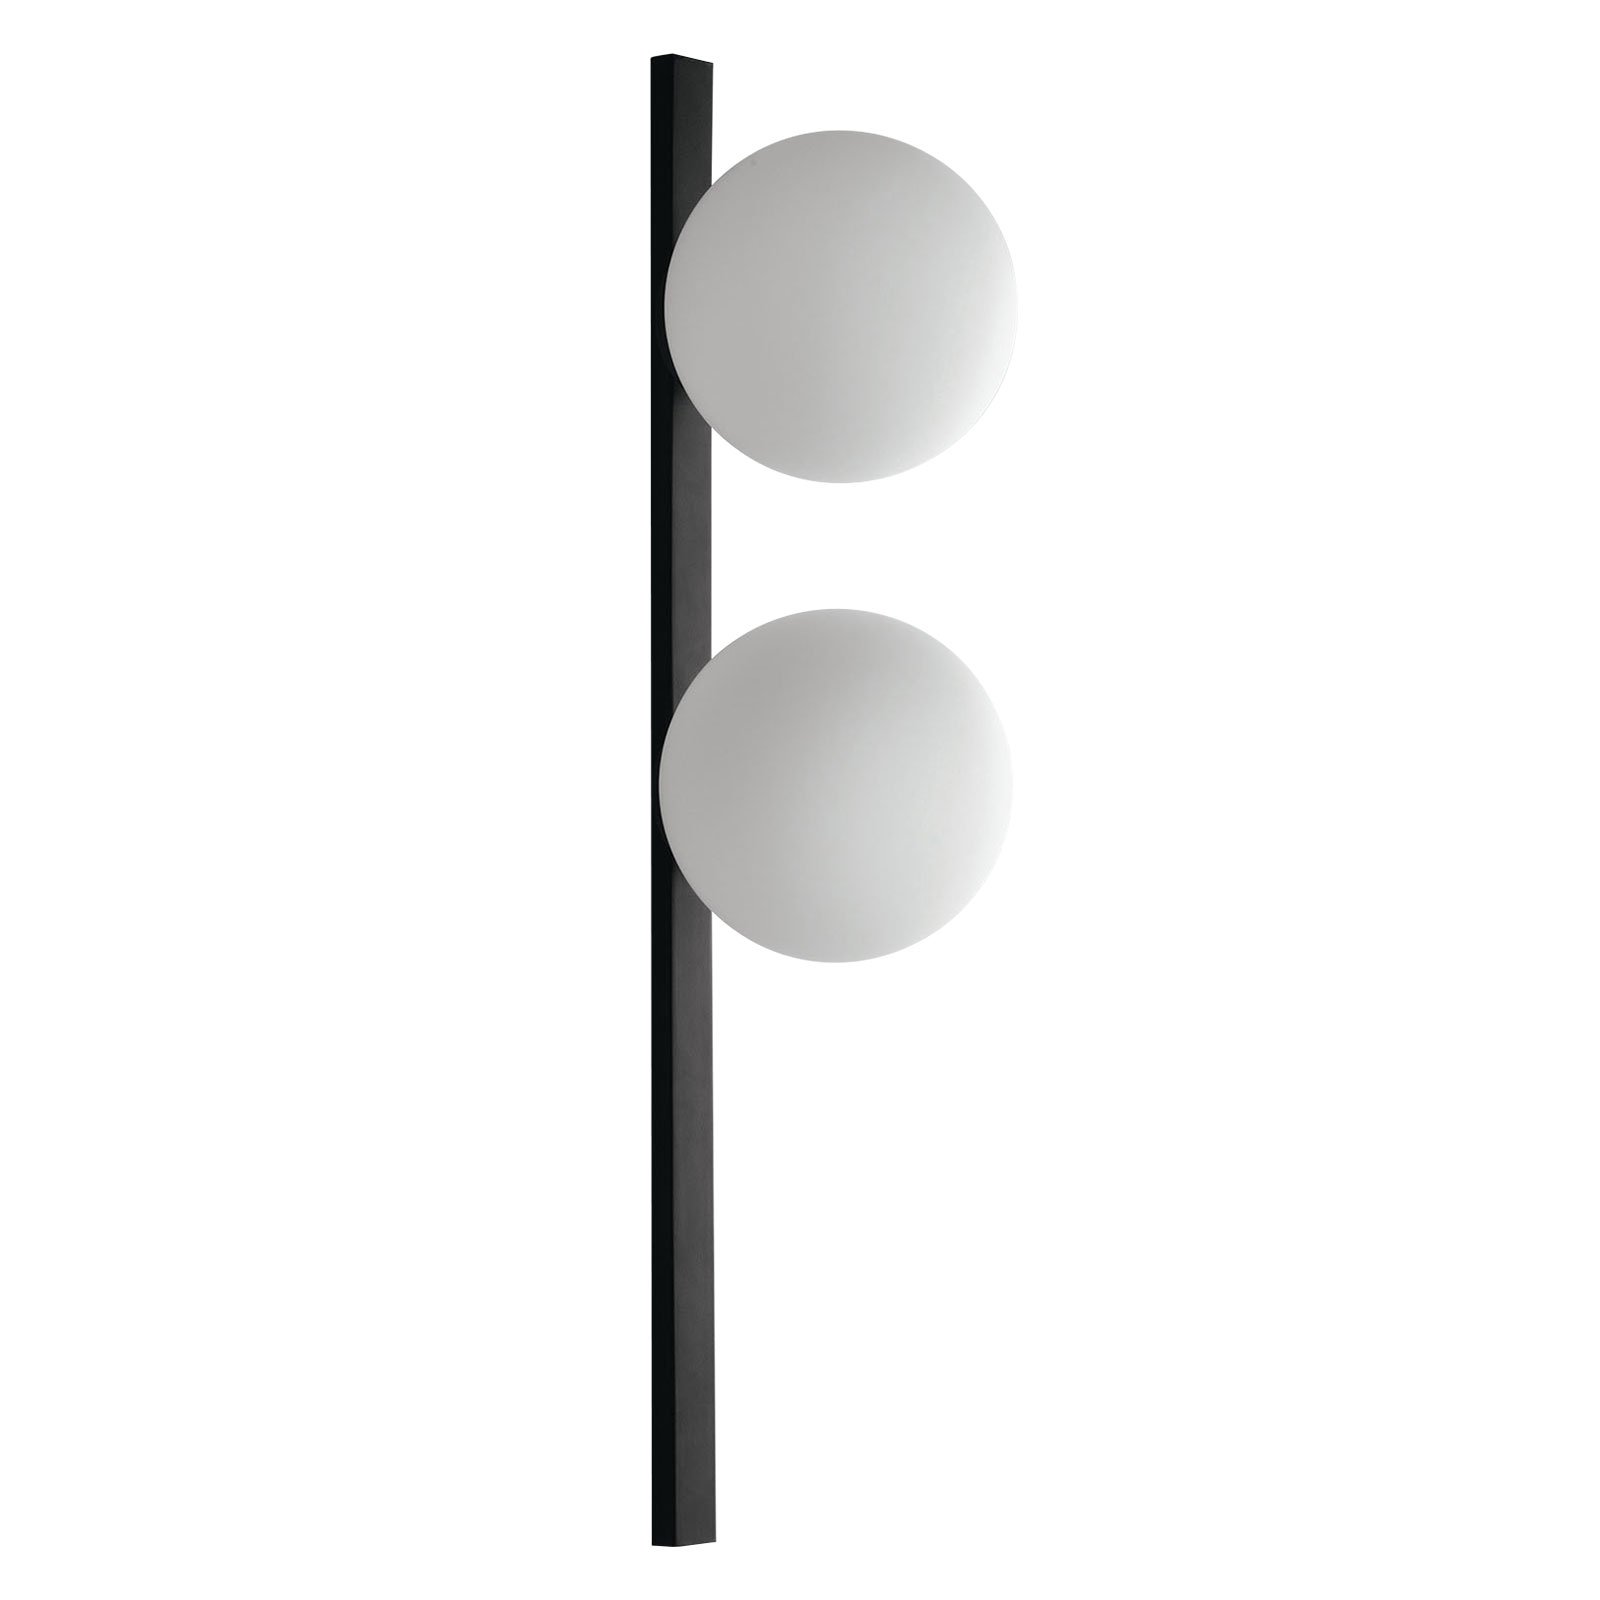 Pluto wall light in black and white, 2-bulb